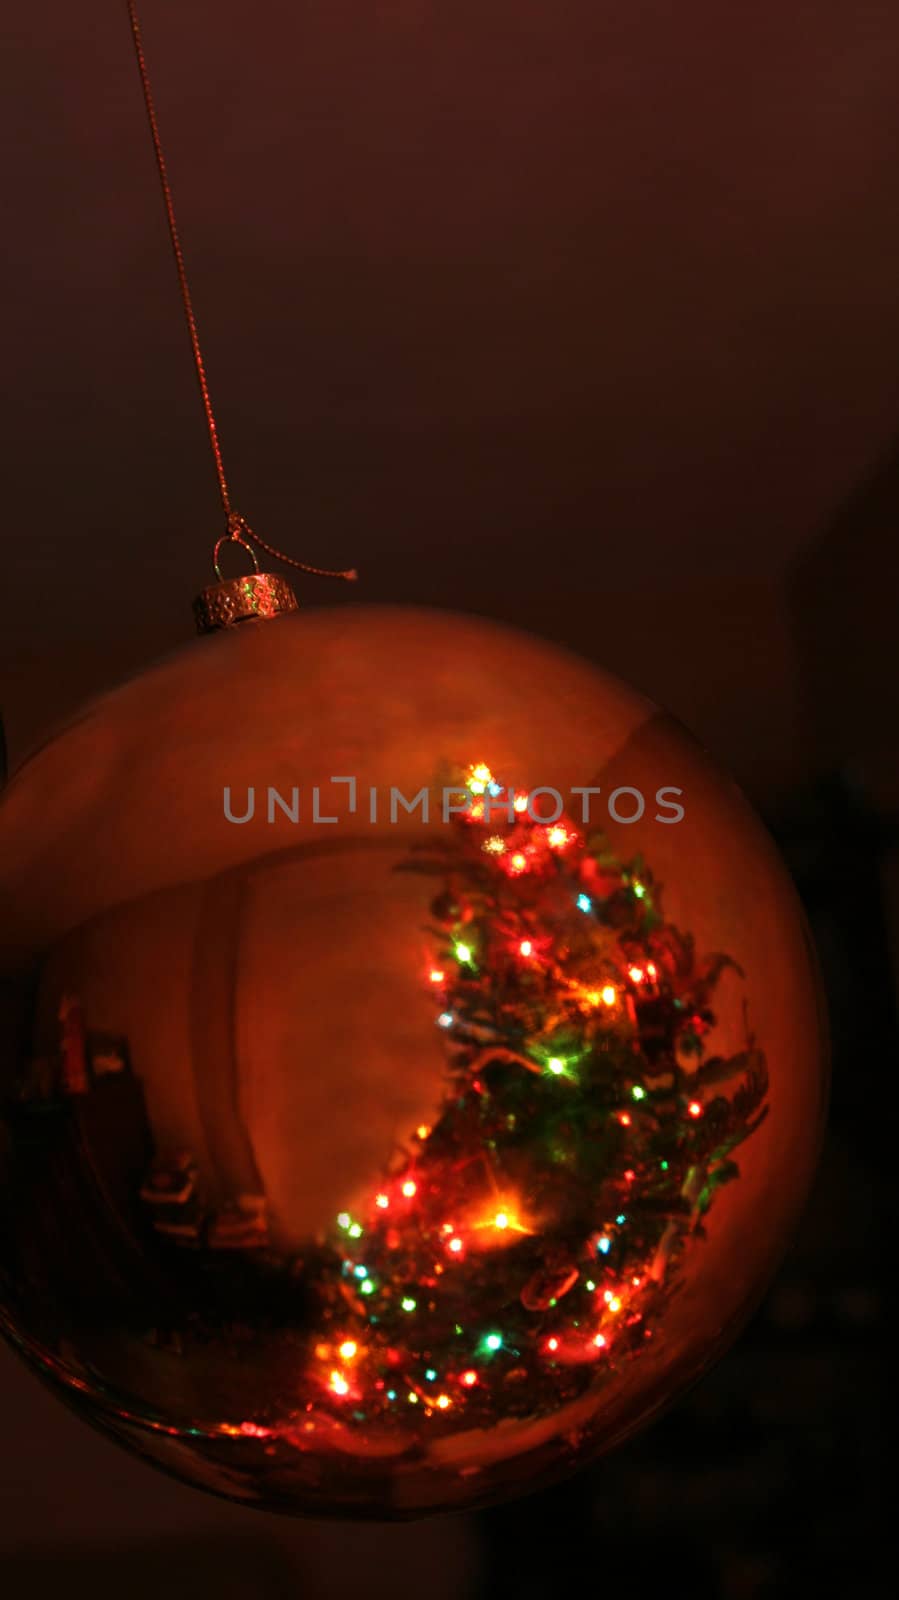 Gold Bauble Tree Reflection
 by ca2hill